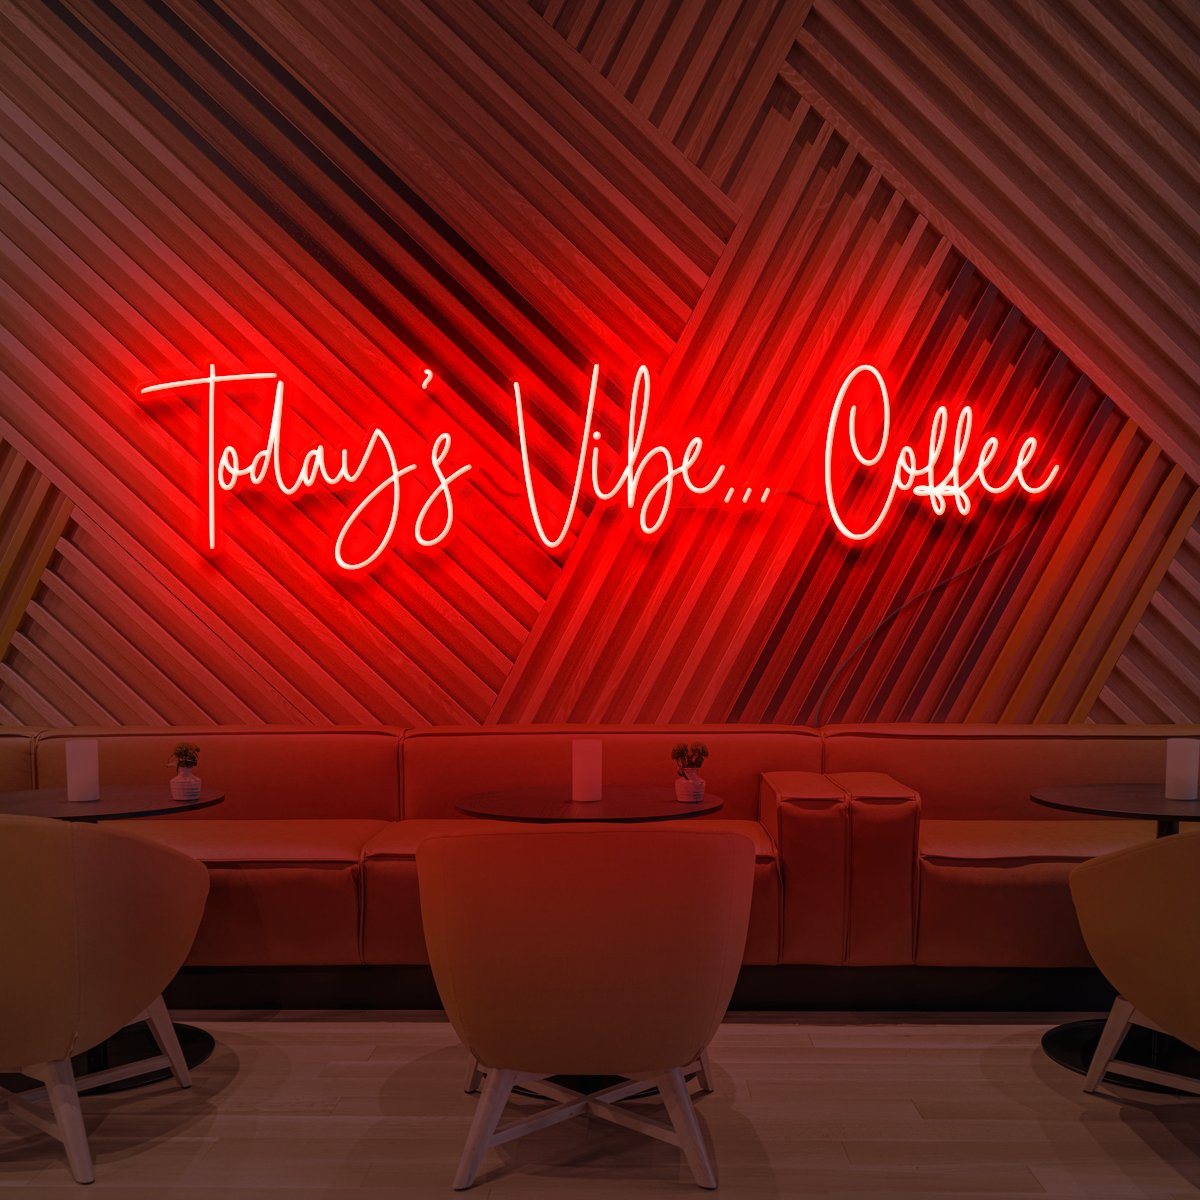 "Today's Vibe... Coffee" Neon Sign for Cafés 90cm (3ft) / Red / LED Neon by Neon Icons